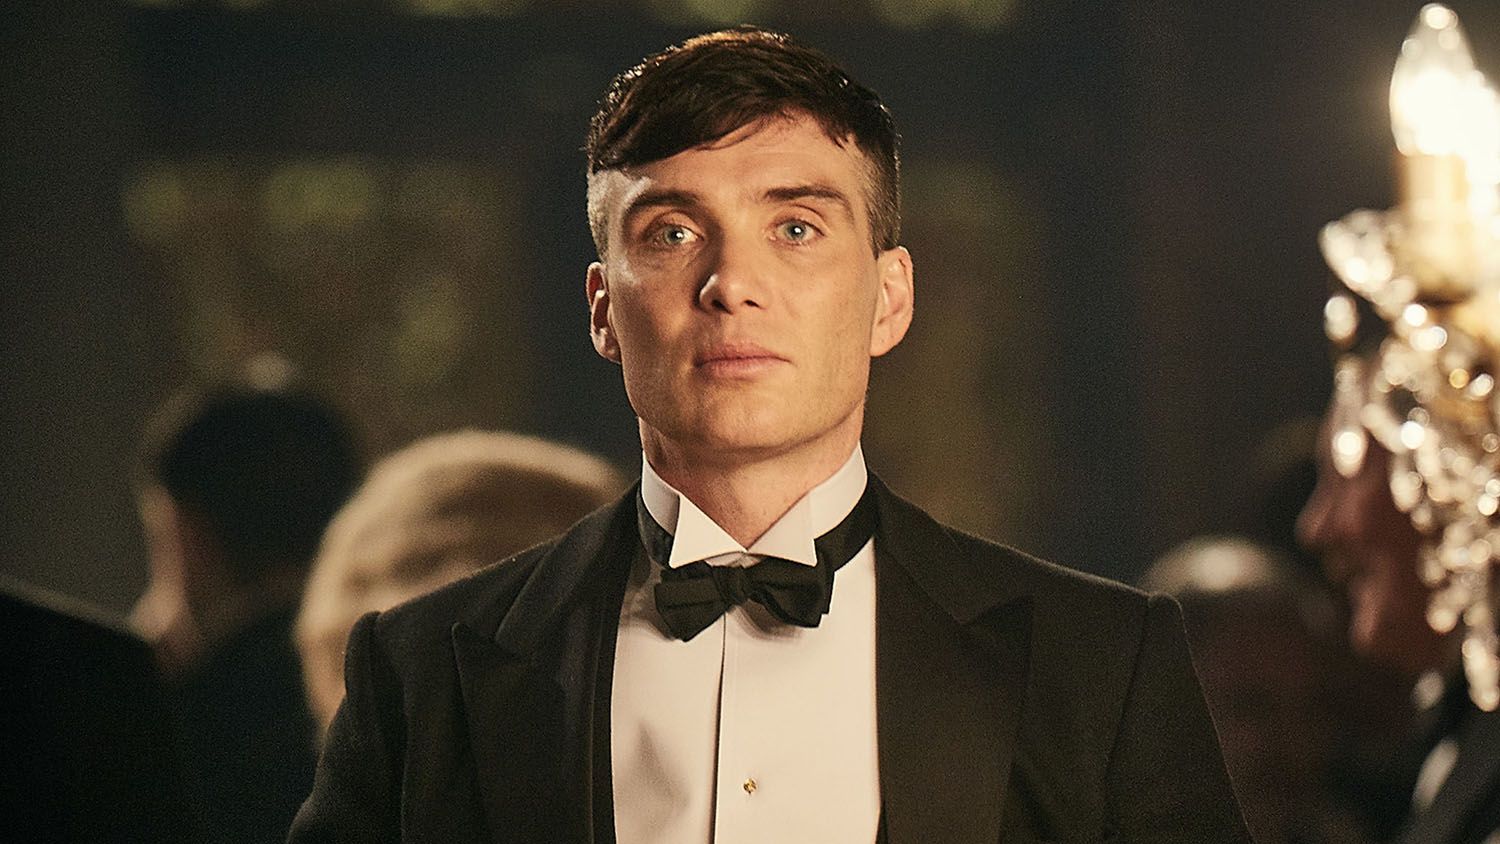 Cillian Murphy open to Peaky Blinders movie but there's a catch -  Entertainment News